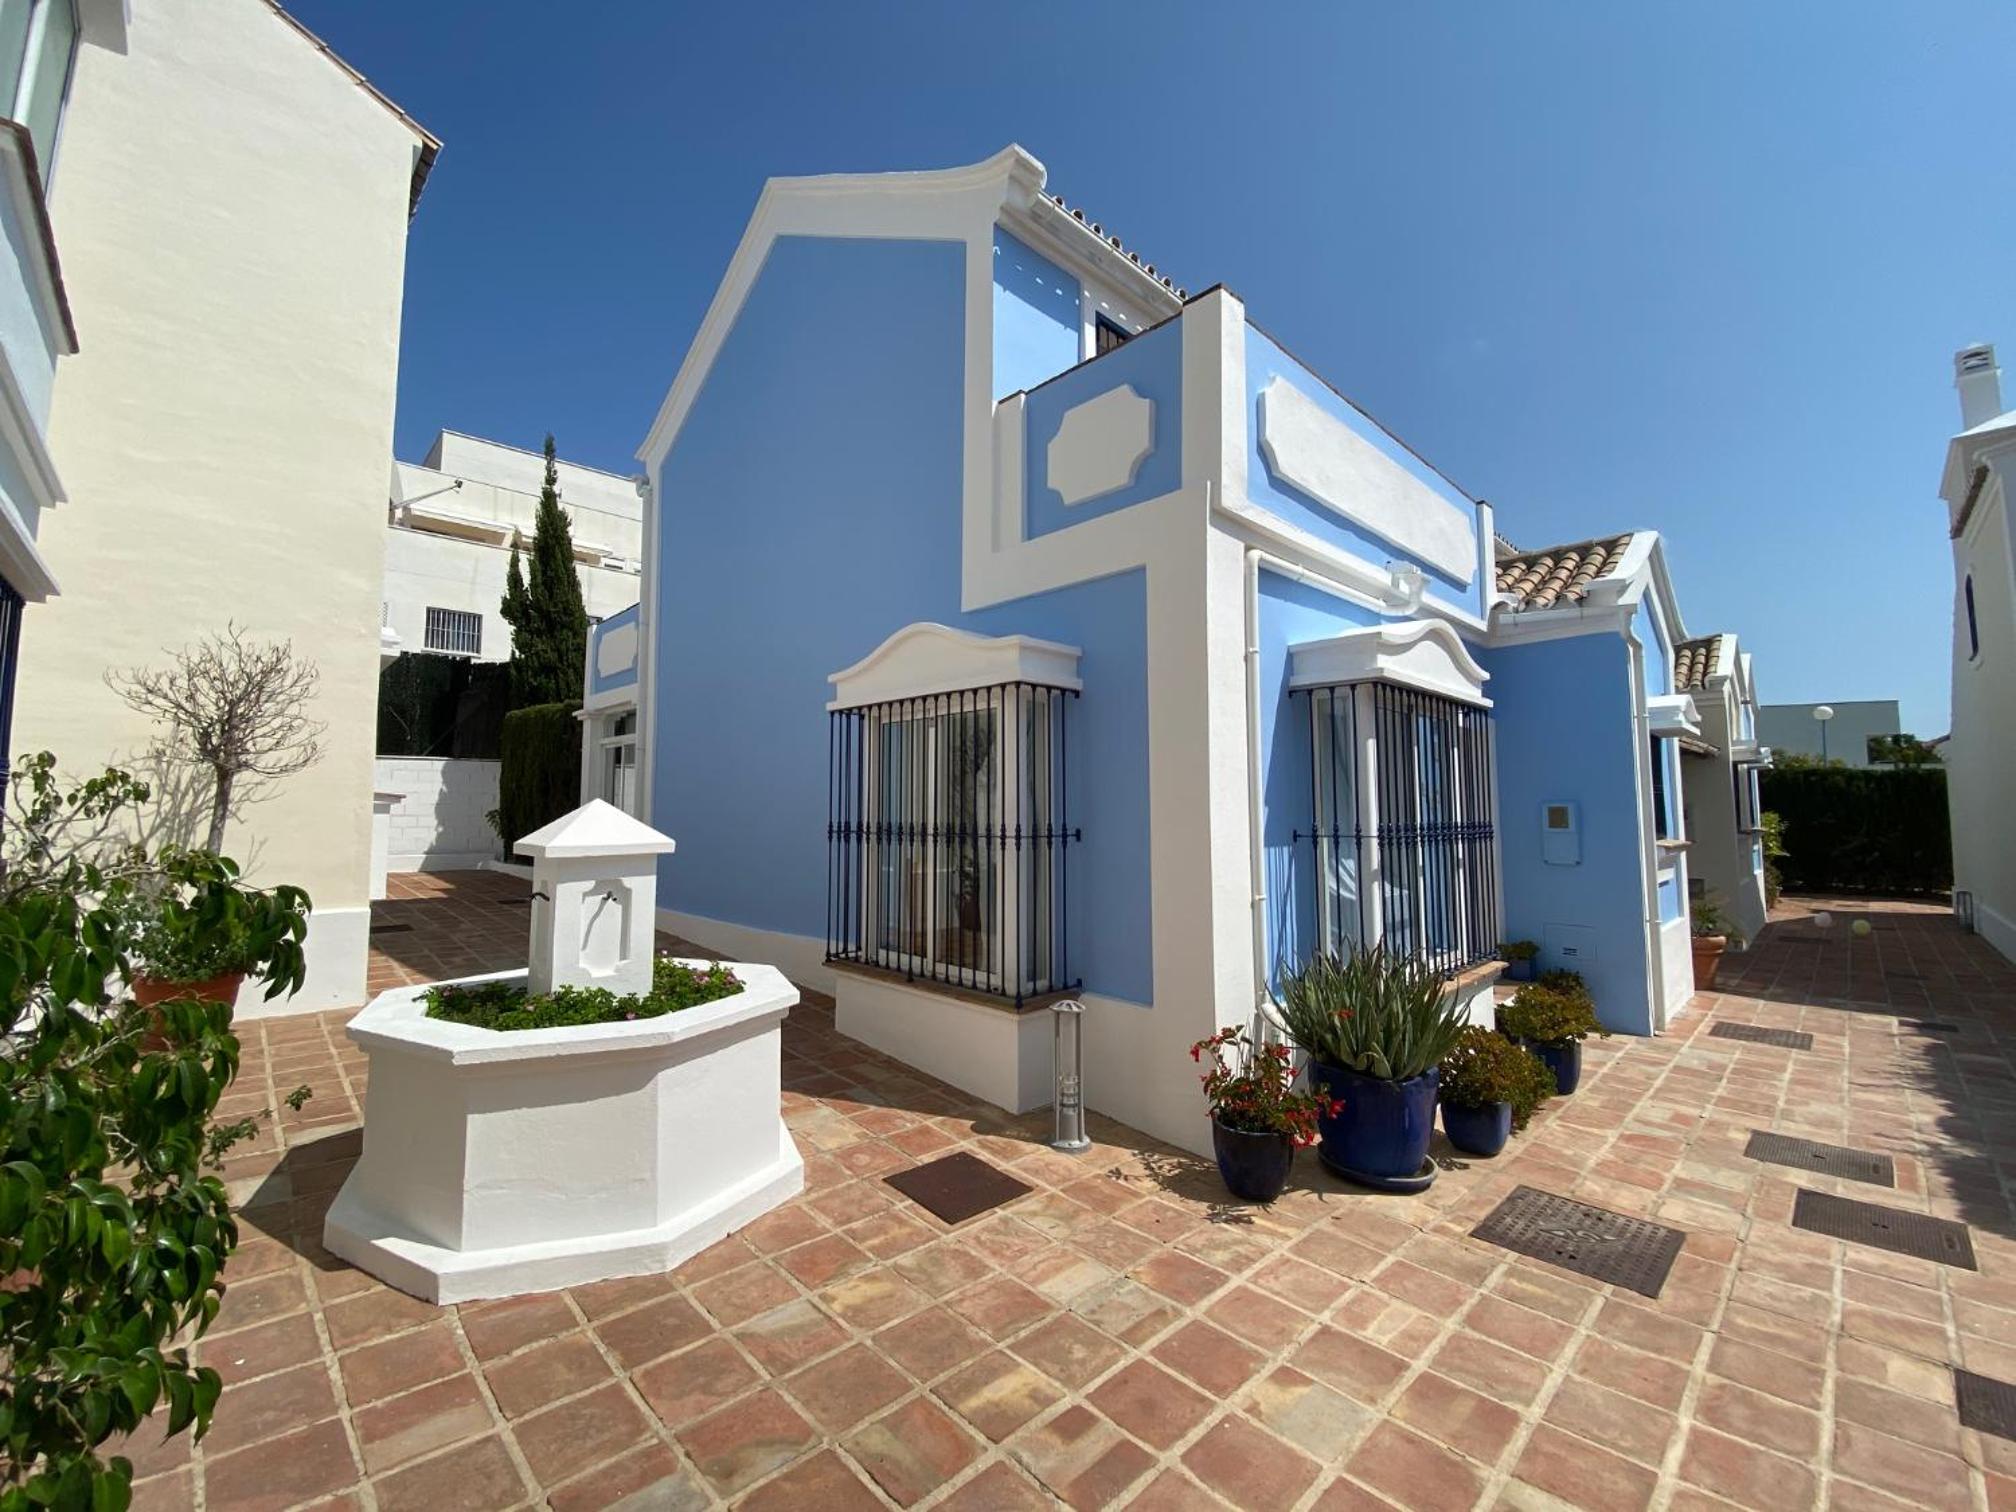 Charming 1 bedroom suite with shared kitchen next to Puerto Banus